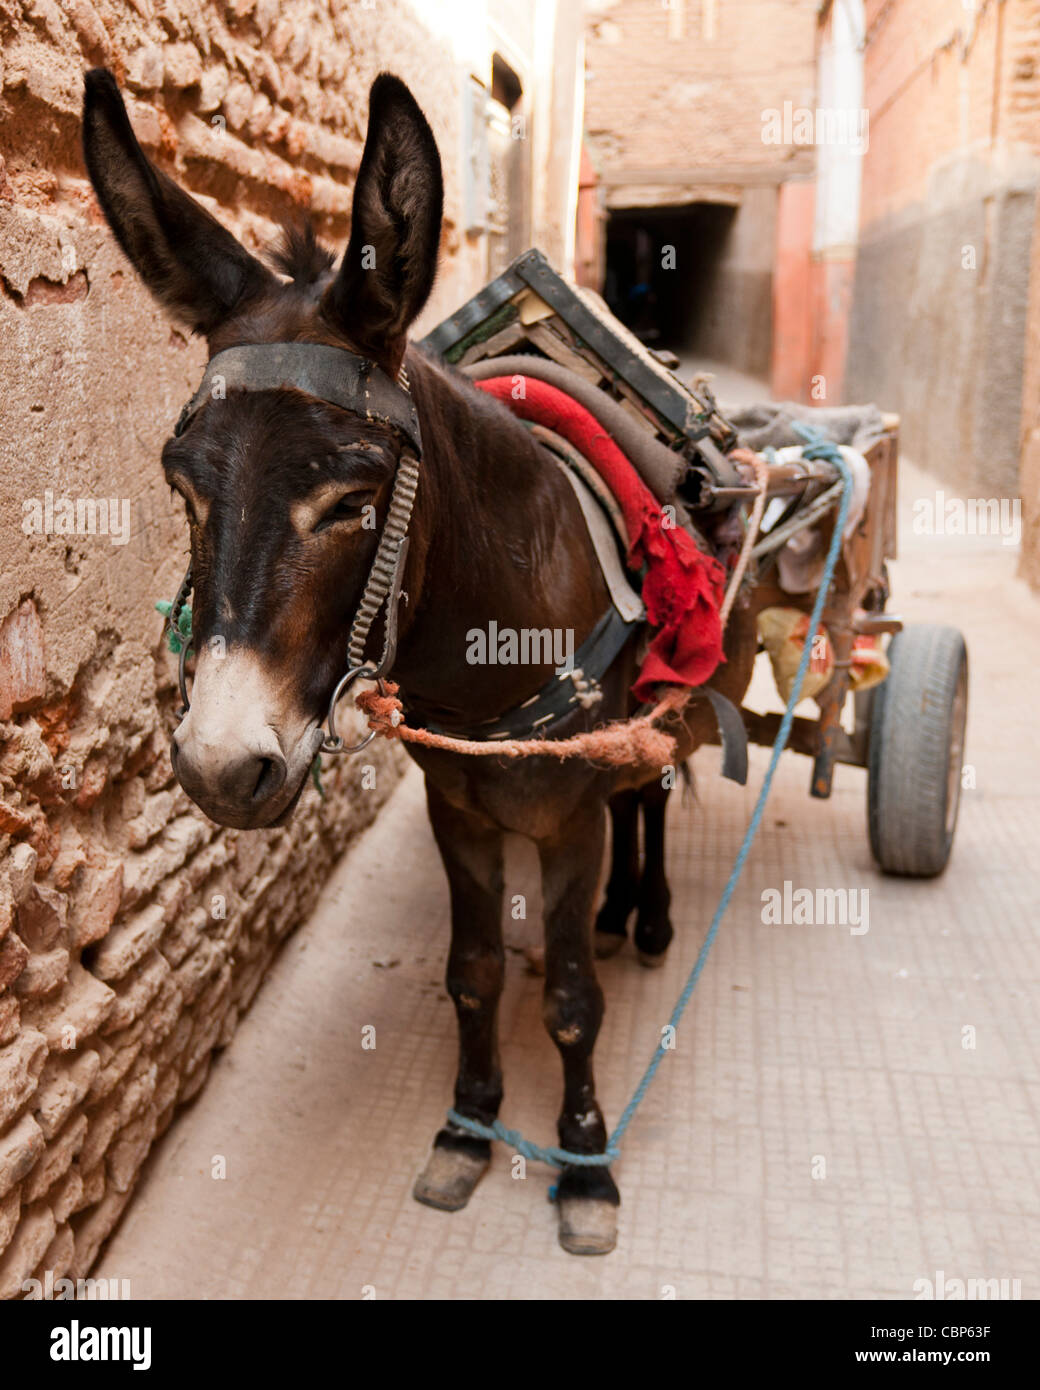 Donkey with cart waiting in Marrakech,Morocco Stock Photo